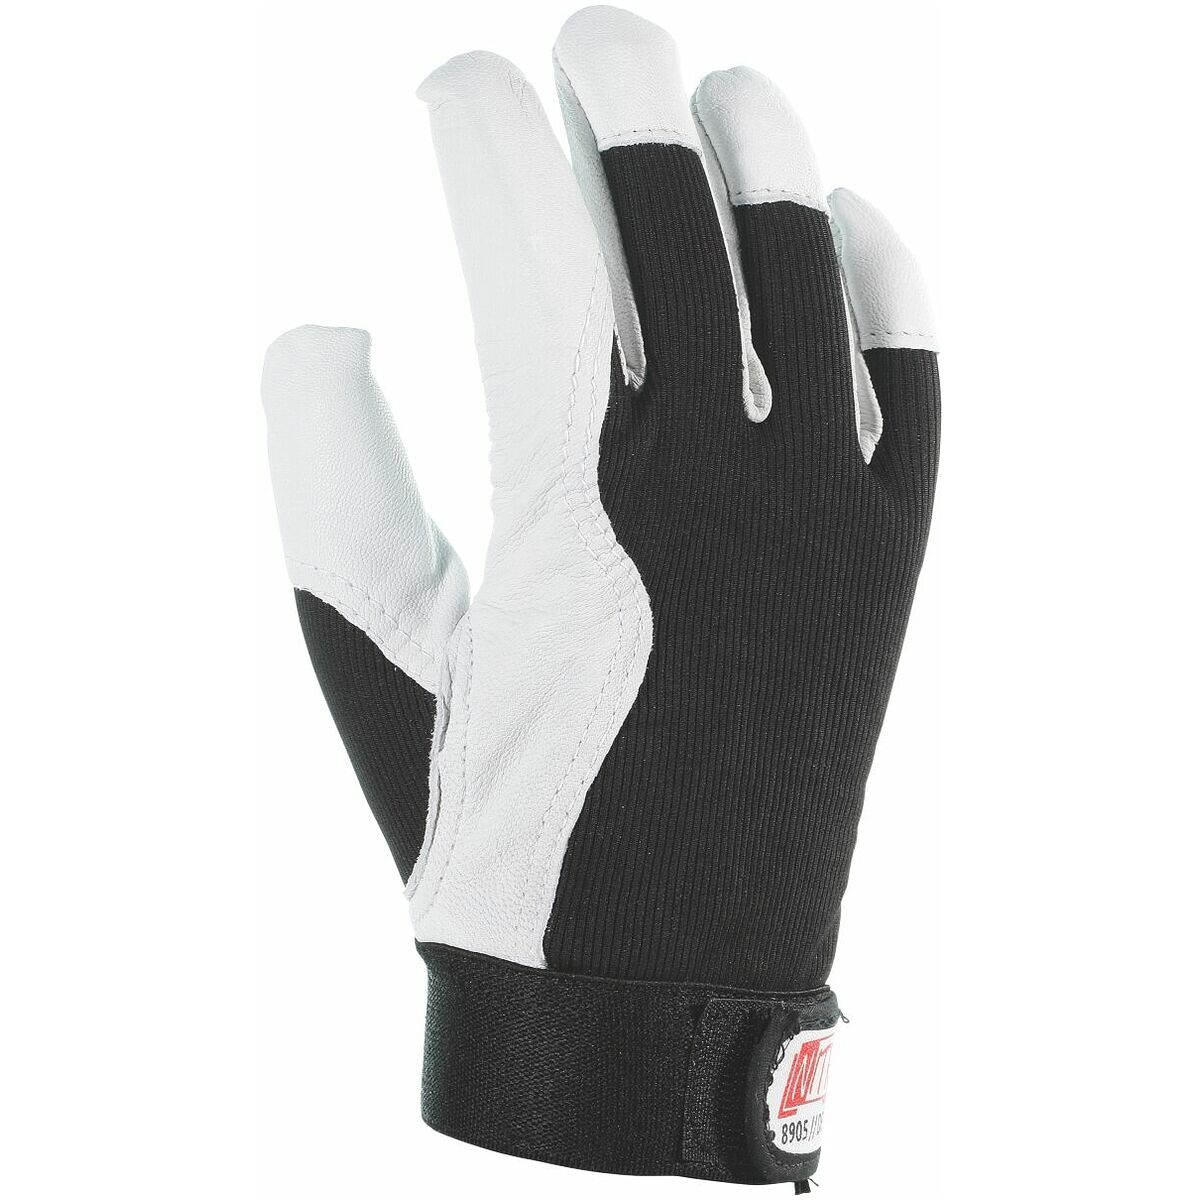 Pair of driver’s gloves, unlined 8905 // DEXTER 1 9